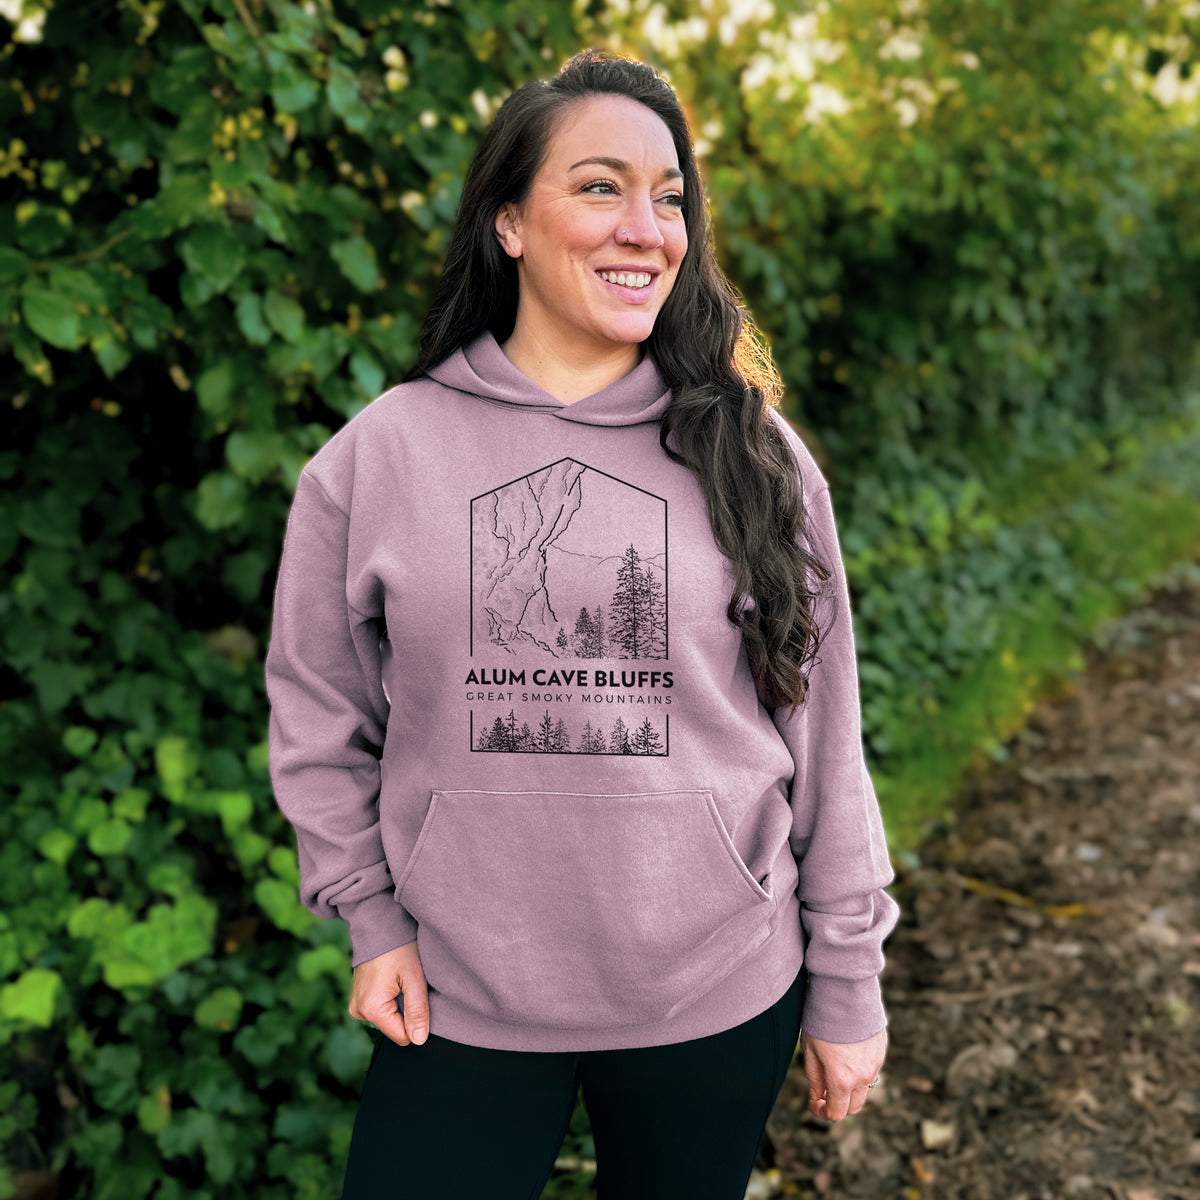 Alum Cave Bluffs - Great Smoky Mountains National Park  - Bodega Midweight Hoodie